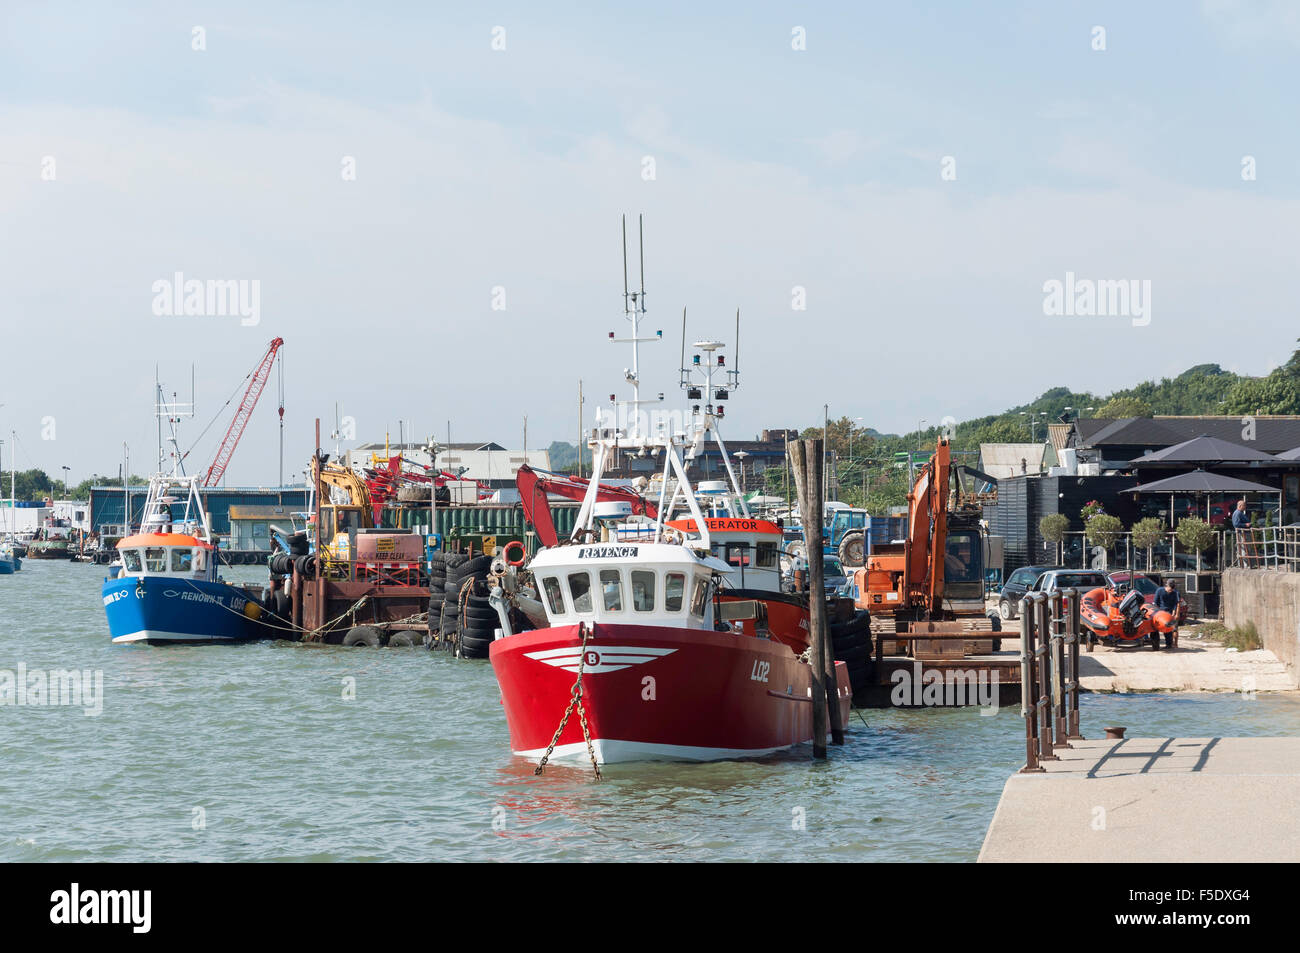 Fishing boats in harbour, Old Leigh, Leigh-on-Sea, Essex, England, United Kingdom Stock Photo